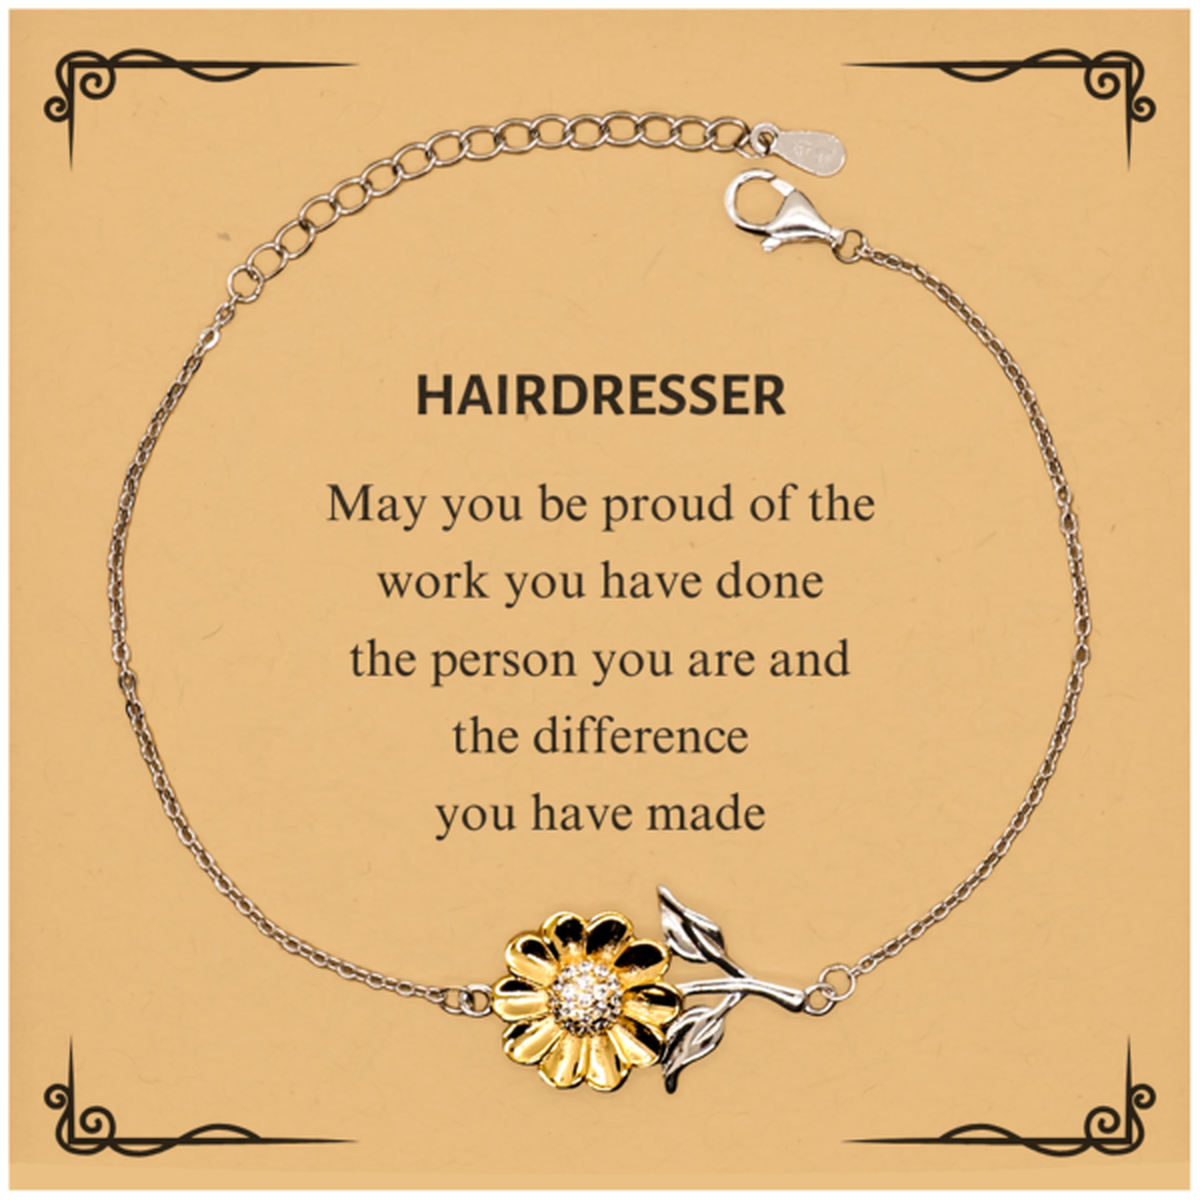 Hairdresser May you be proud of the work you have done, Retirement Hairdresser Sunflower Bracelet for Colleague Appreciation Gifts Amazing for Hairdresser